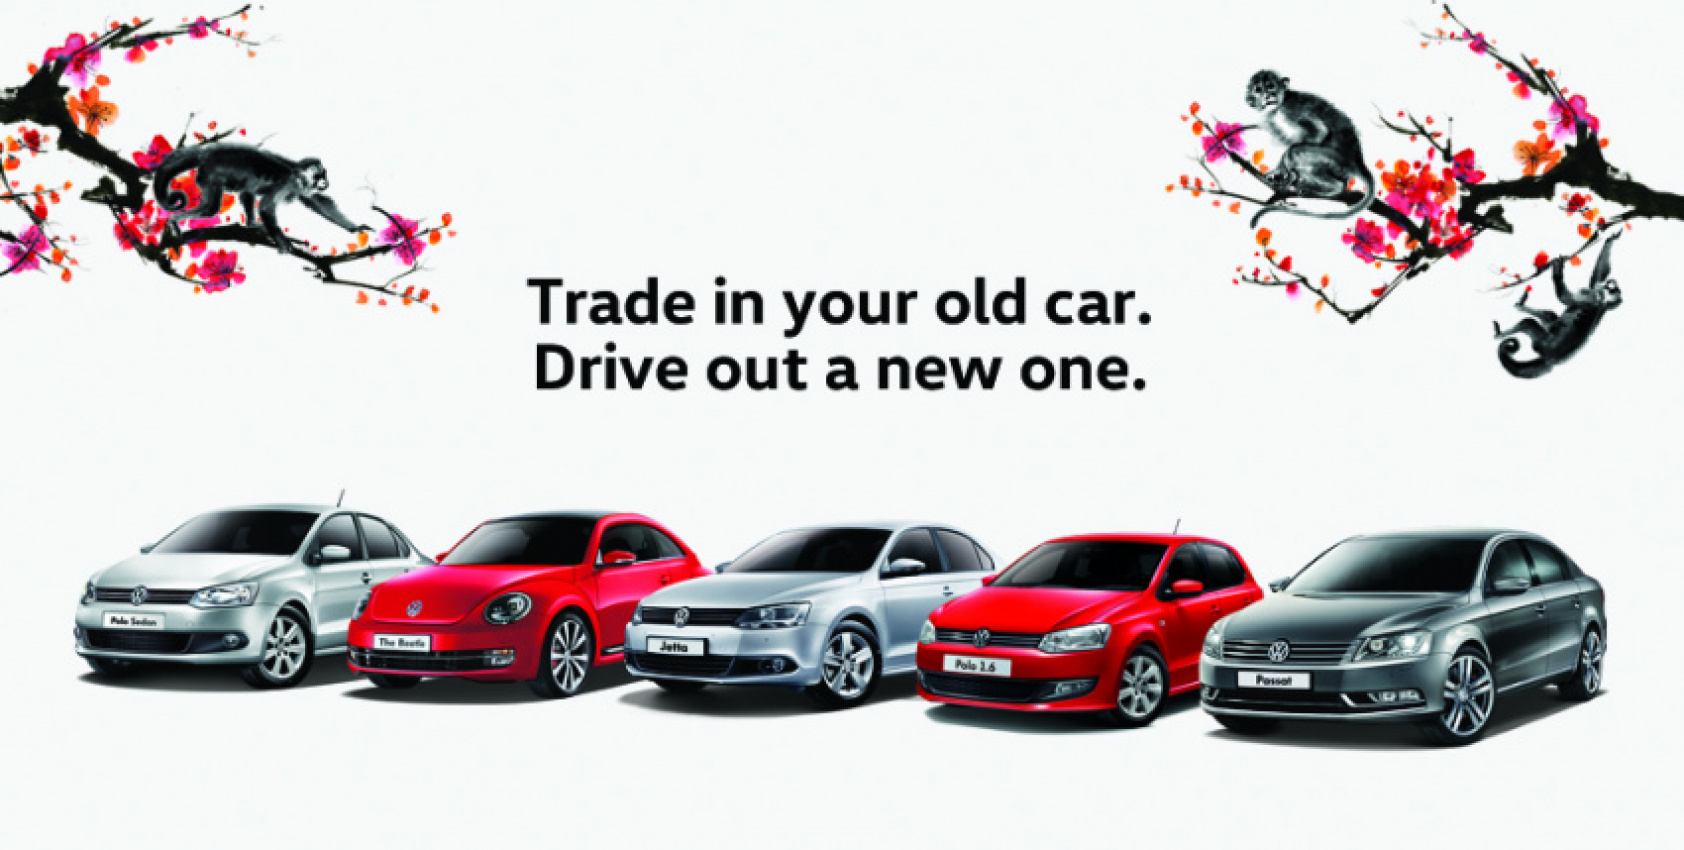 autos, cars, ram, volkswagen, campaign, chinese new year, das auto, malaysia, new volkswagen, overtrade program, promotion, sales campaign, trade-in, volkswagen group malaysia, volkswagen malaysia, volkswagen malaysia launches overtrade program